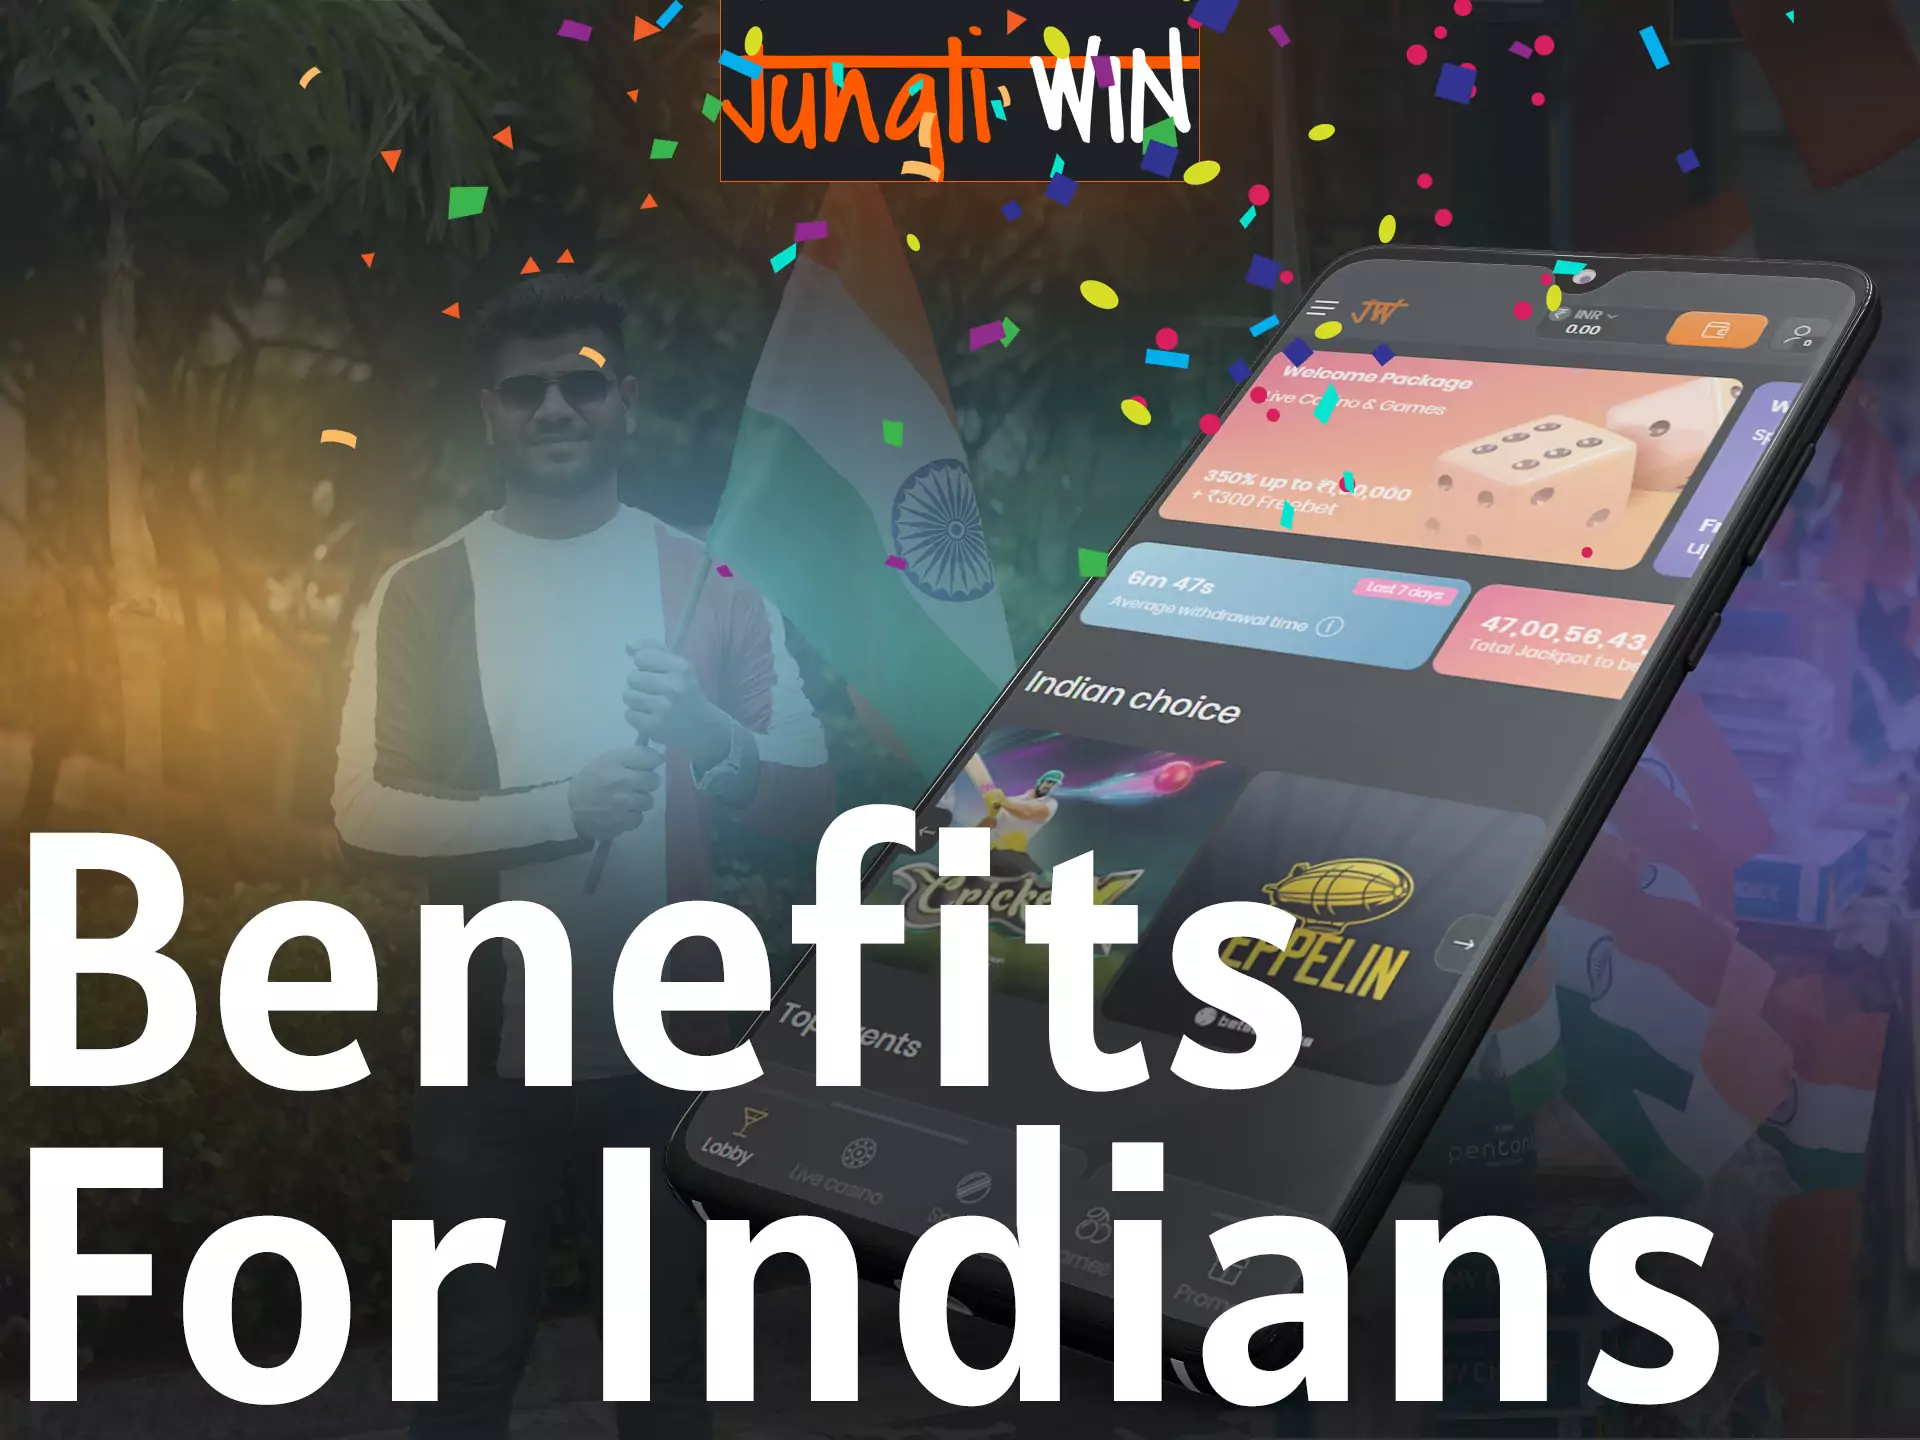 Jungliwin offers many benefits to users from India.